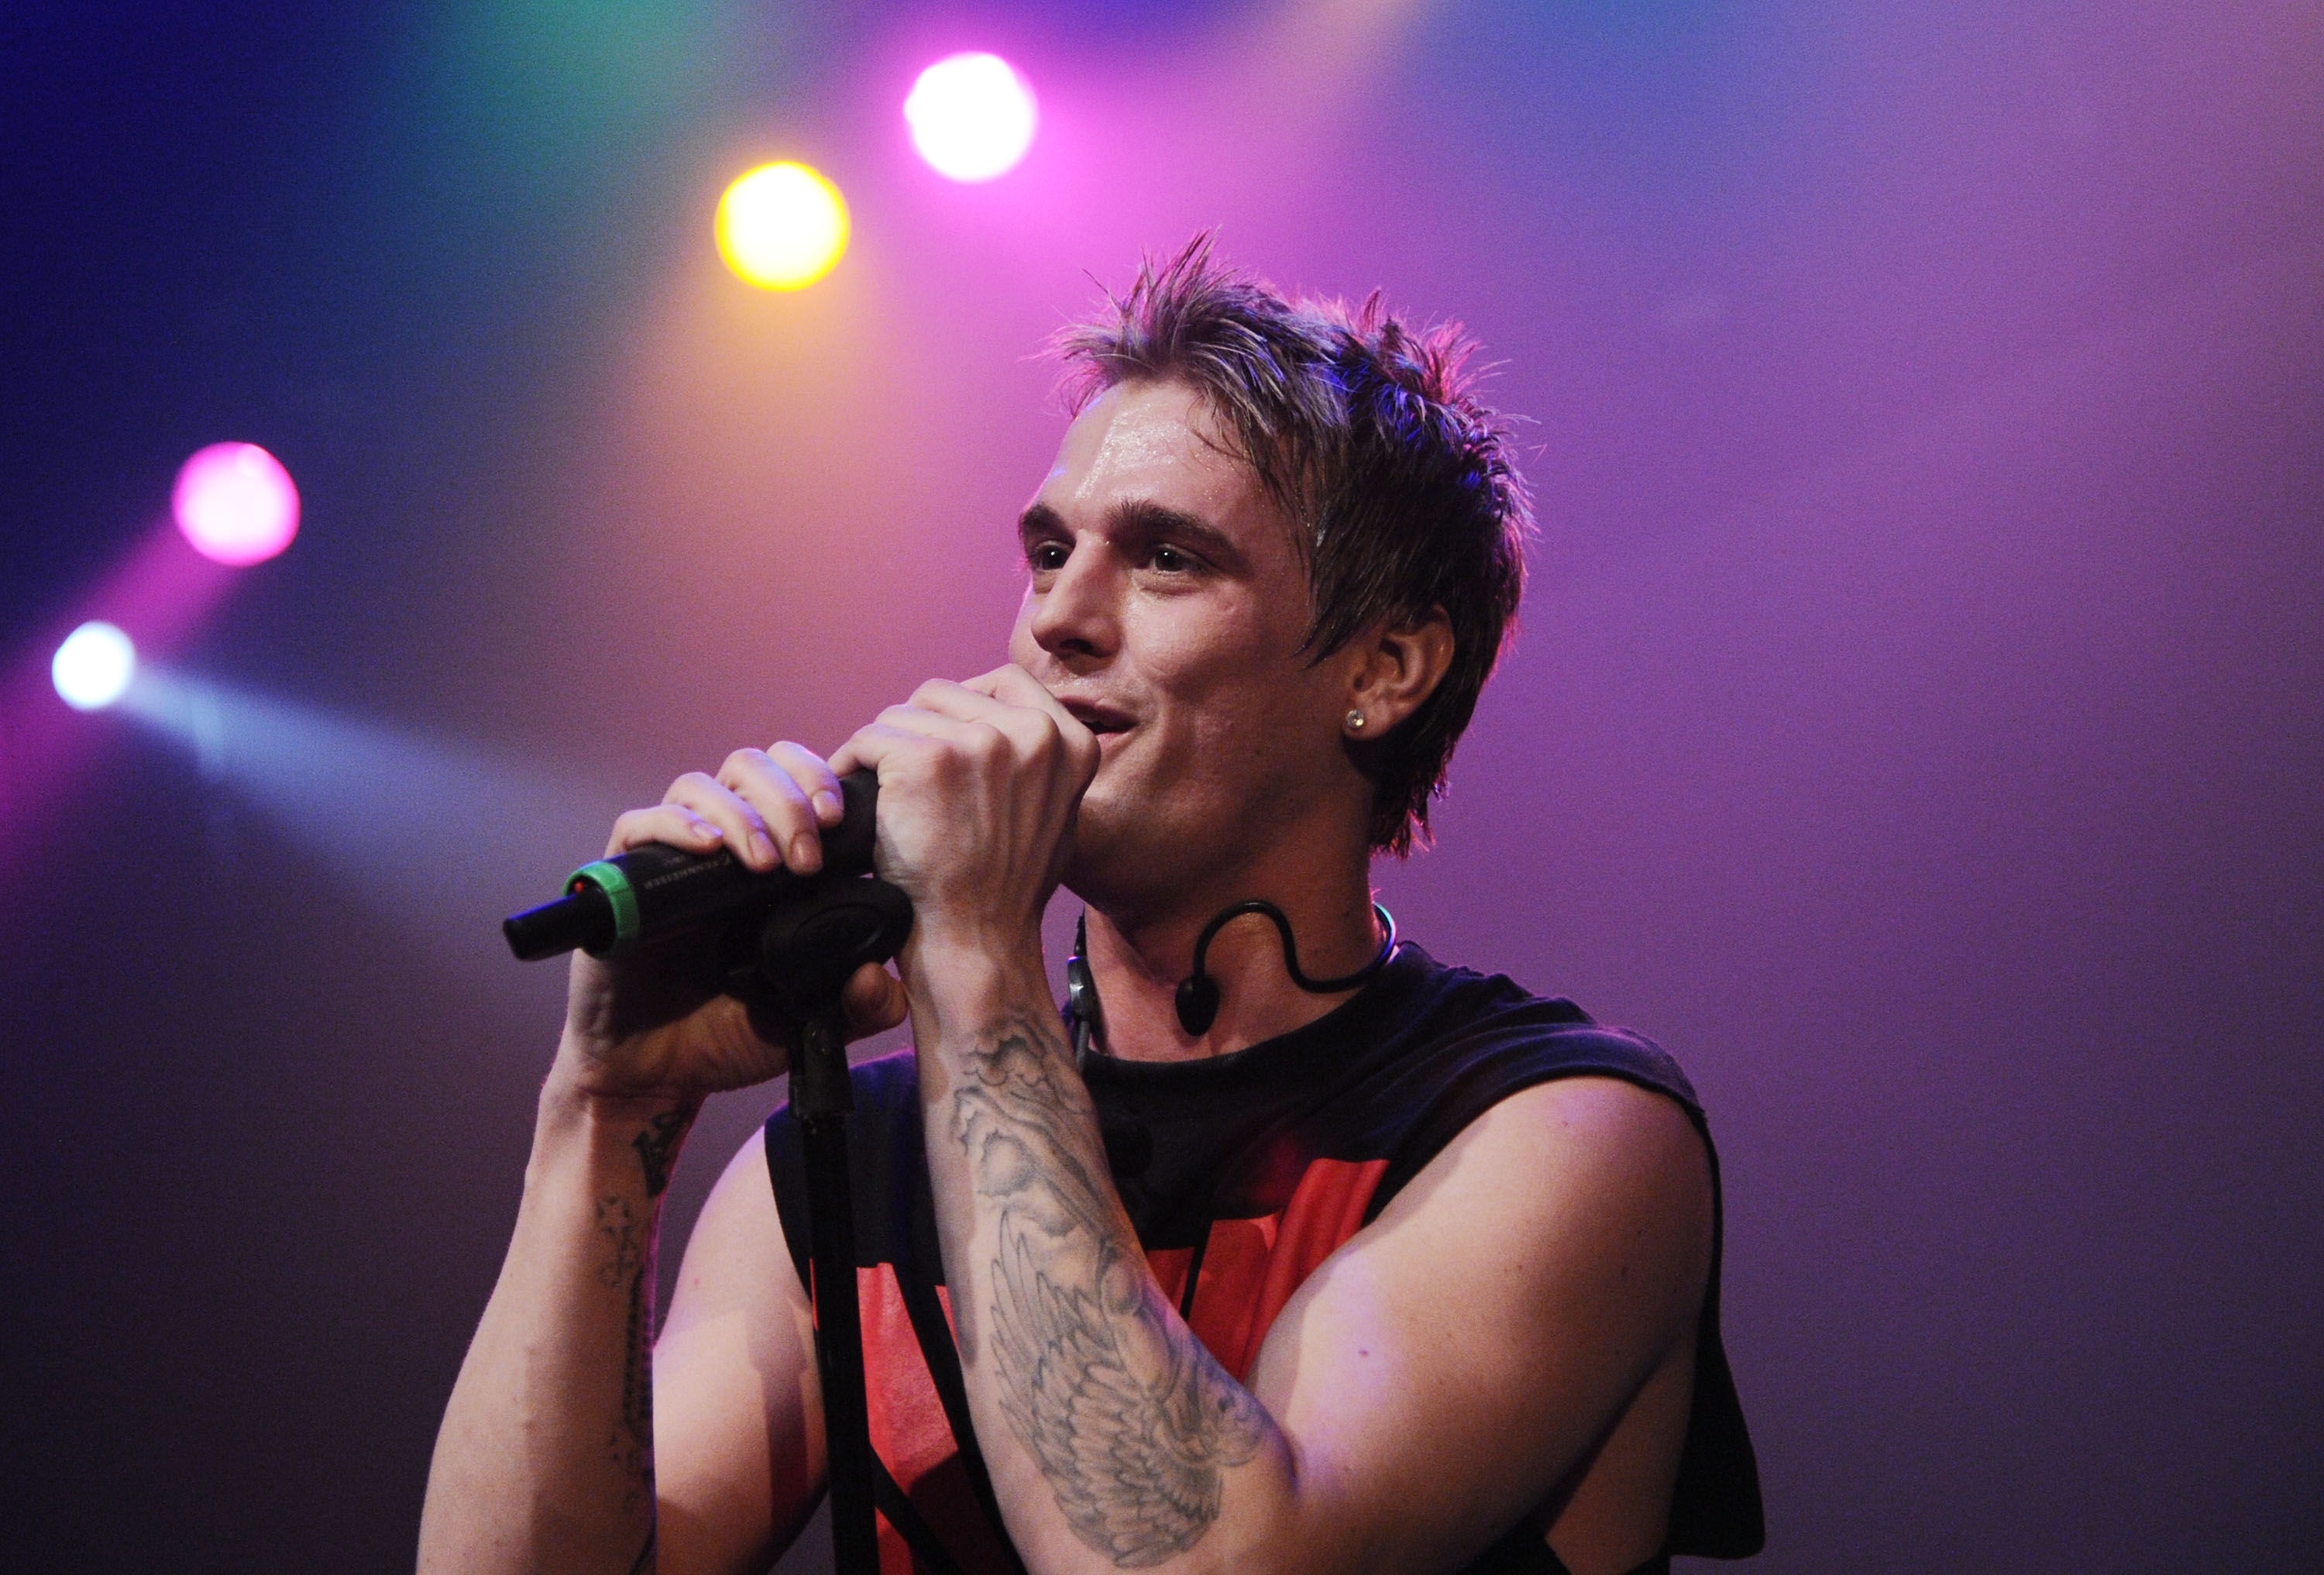 Aaron Carter's Death Puts Spotlight on 'the Epidemic of Cyberbullying'